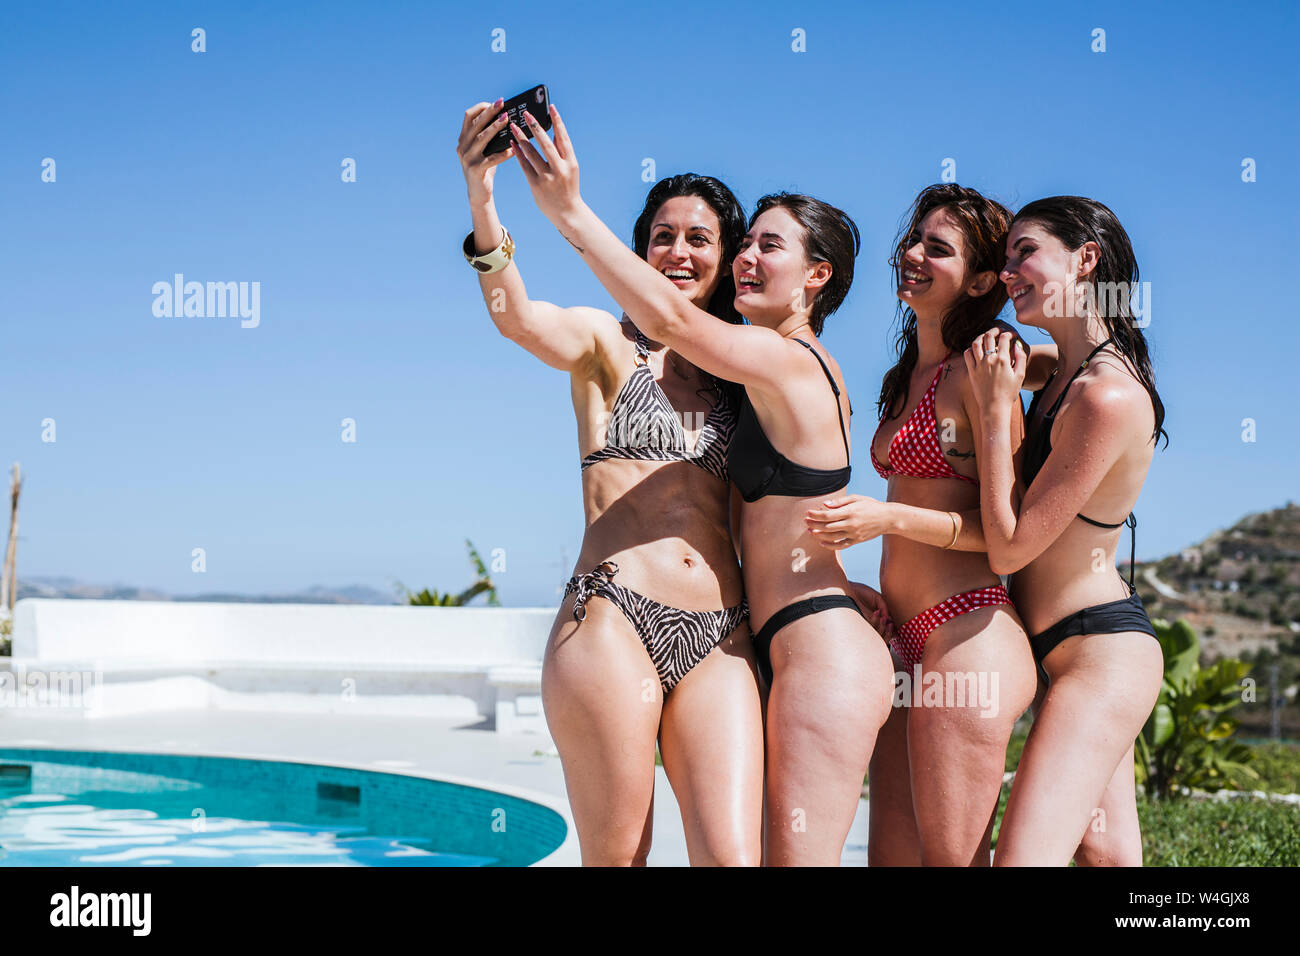 Young women enjoying the summer time at pool, taking a selfie Stock Photo